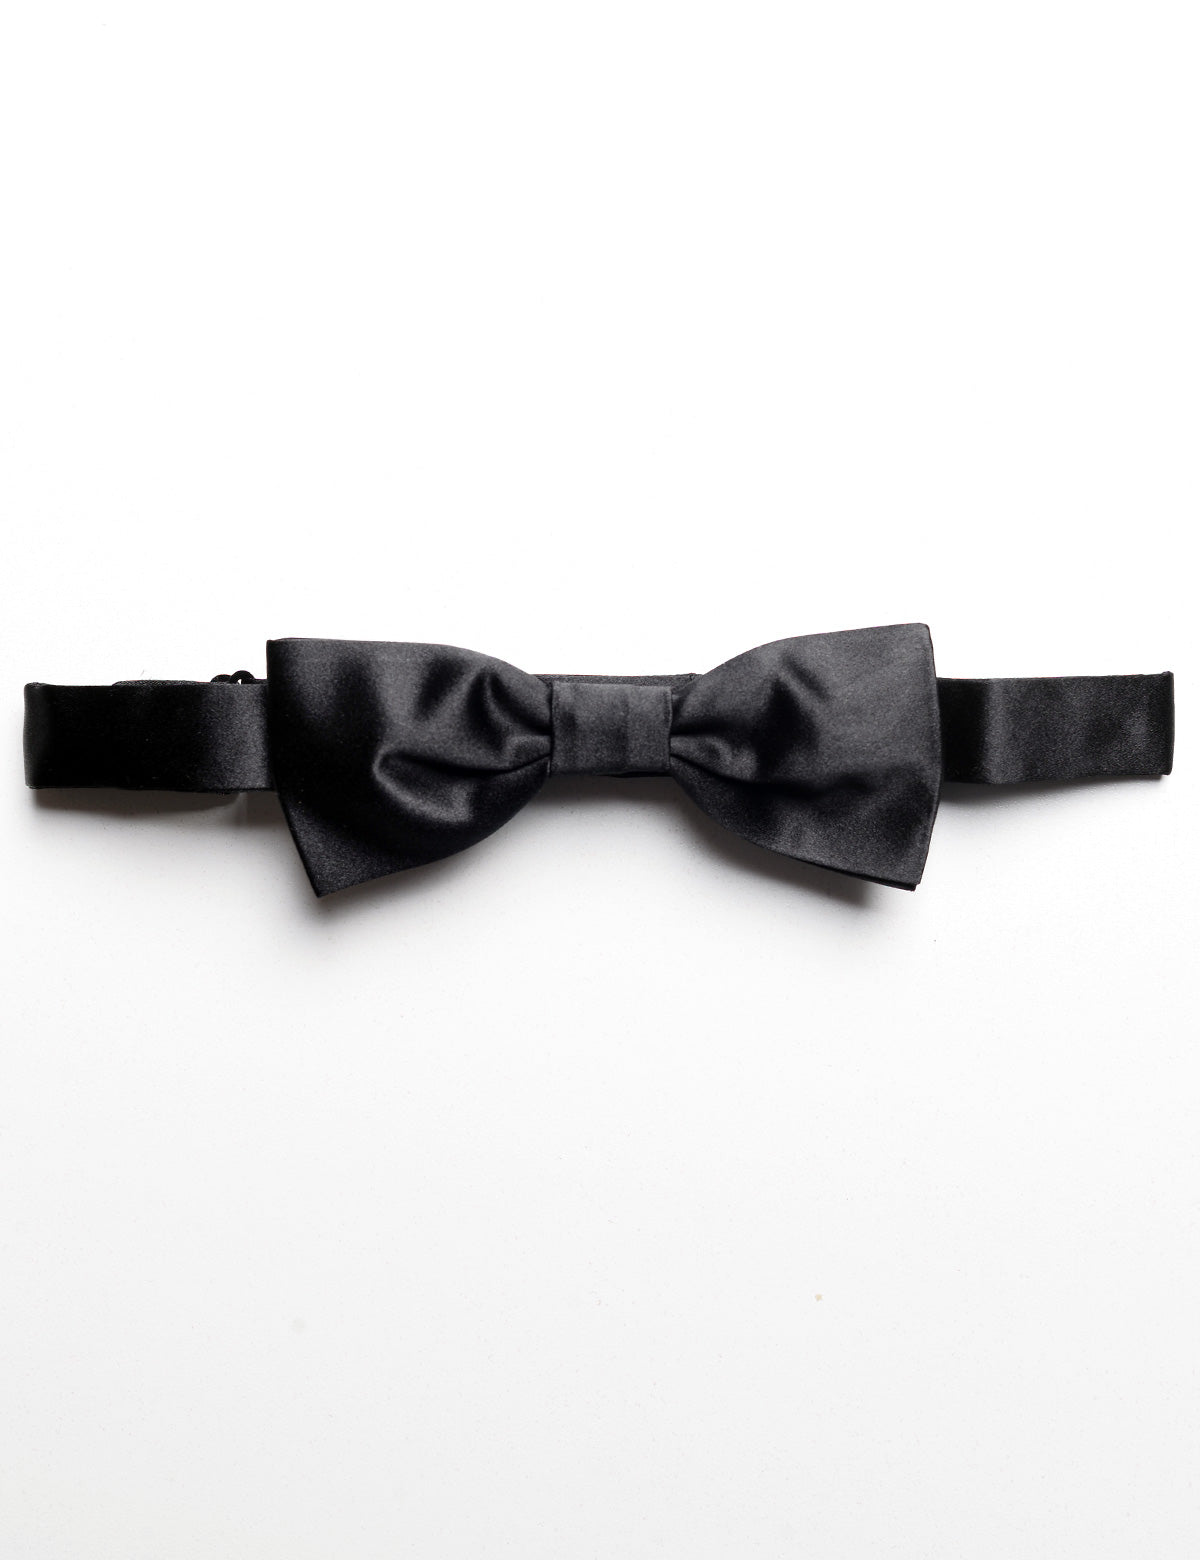 Tied photo of Brooklyn Tailors Formal Bowtie in Black Satin